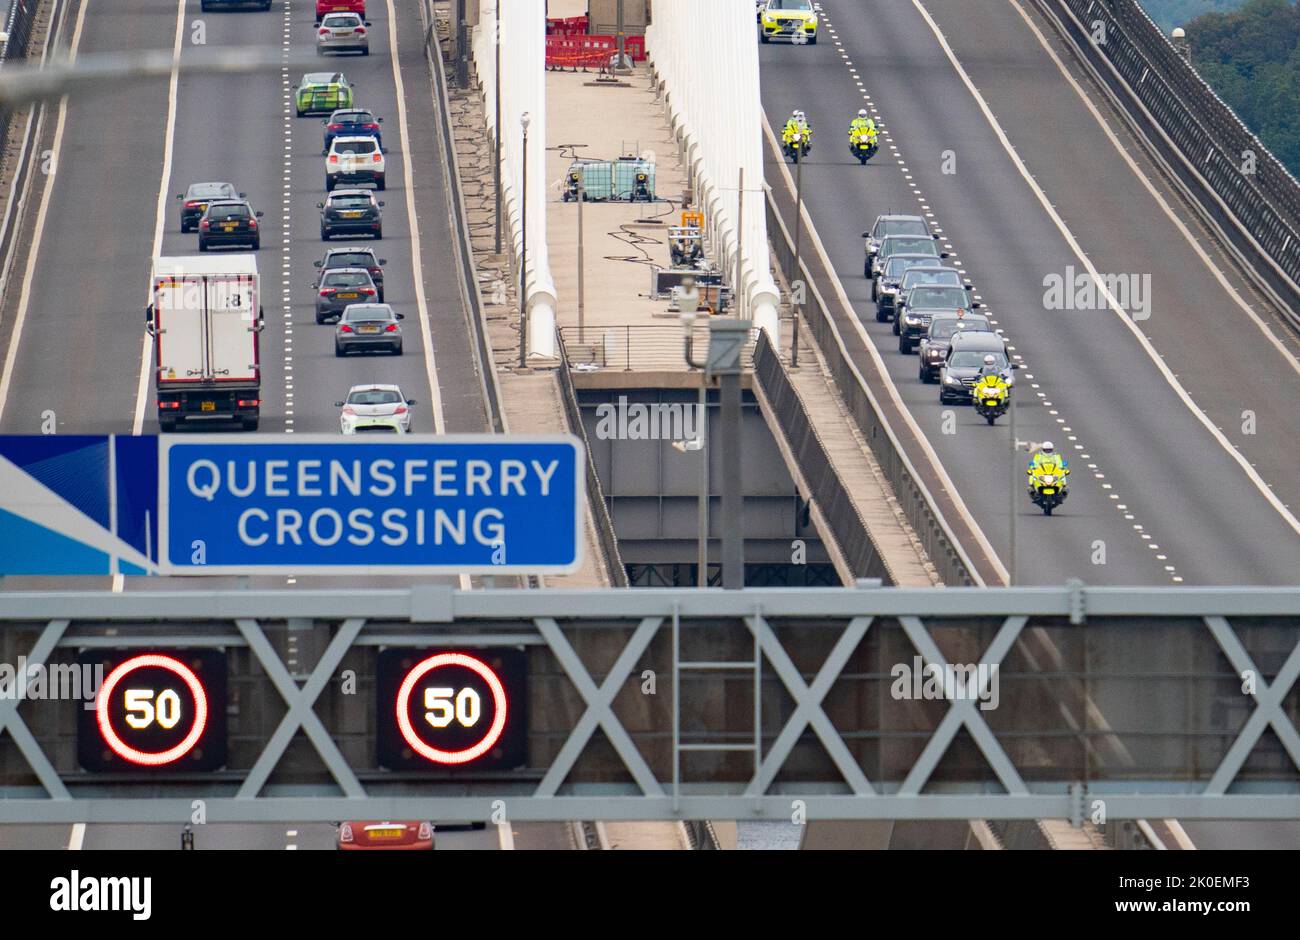 South Queensferry, Scotland, UK. 11th September 2022. Queen Elizabeth II coffin cortège drives across Queensferry Crossing Bridge at South Queensferry. The Queen opened this bridge almost 5 years to the day on 4 September 2017. Iain Masterton/Alamy Live News Stock Photo